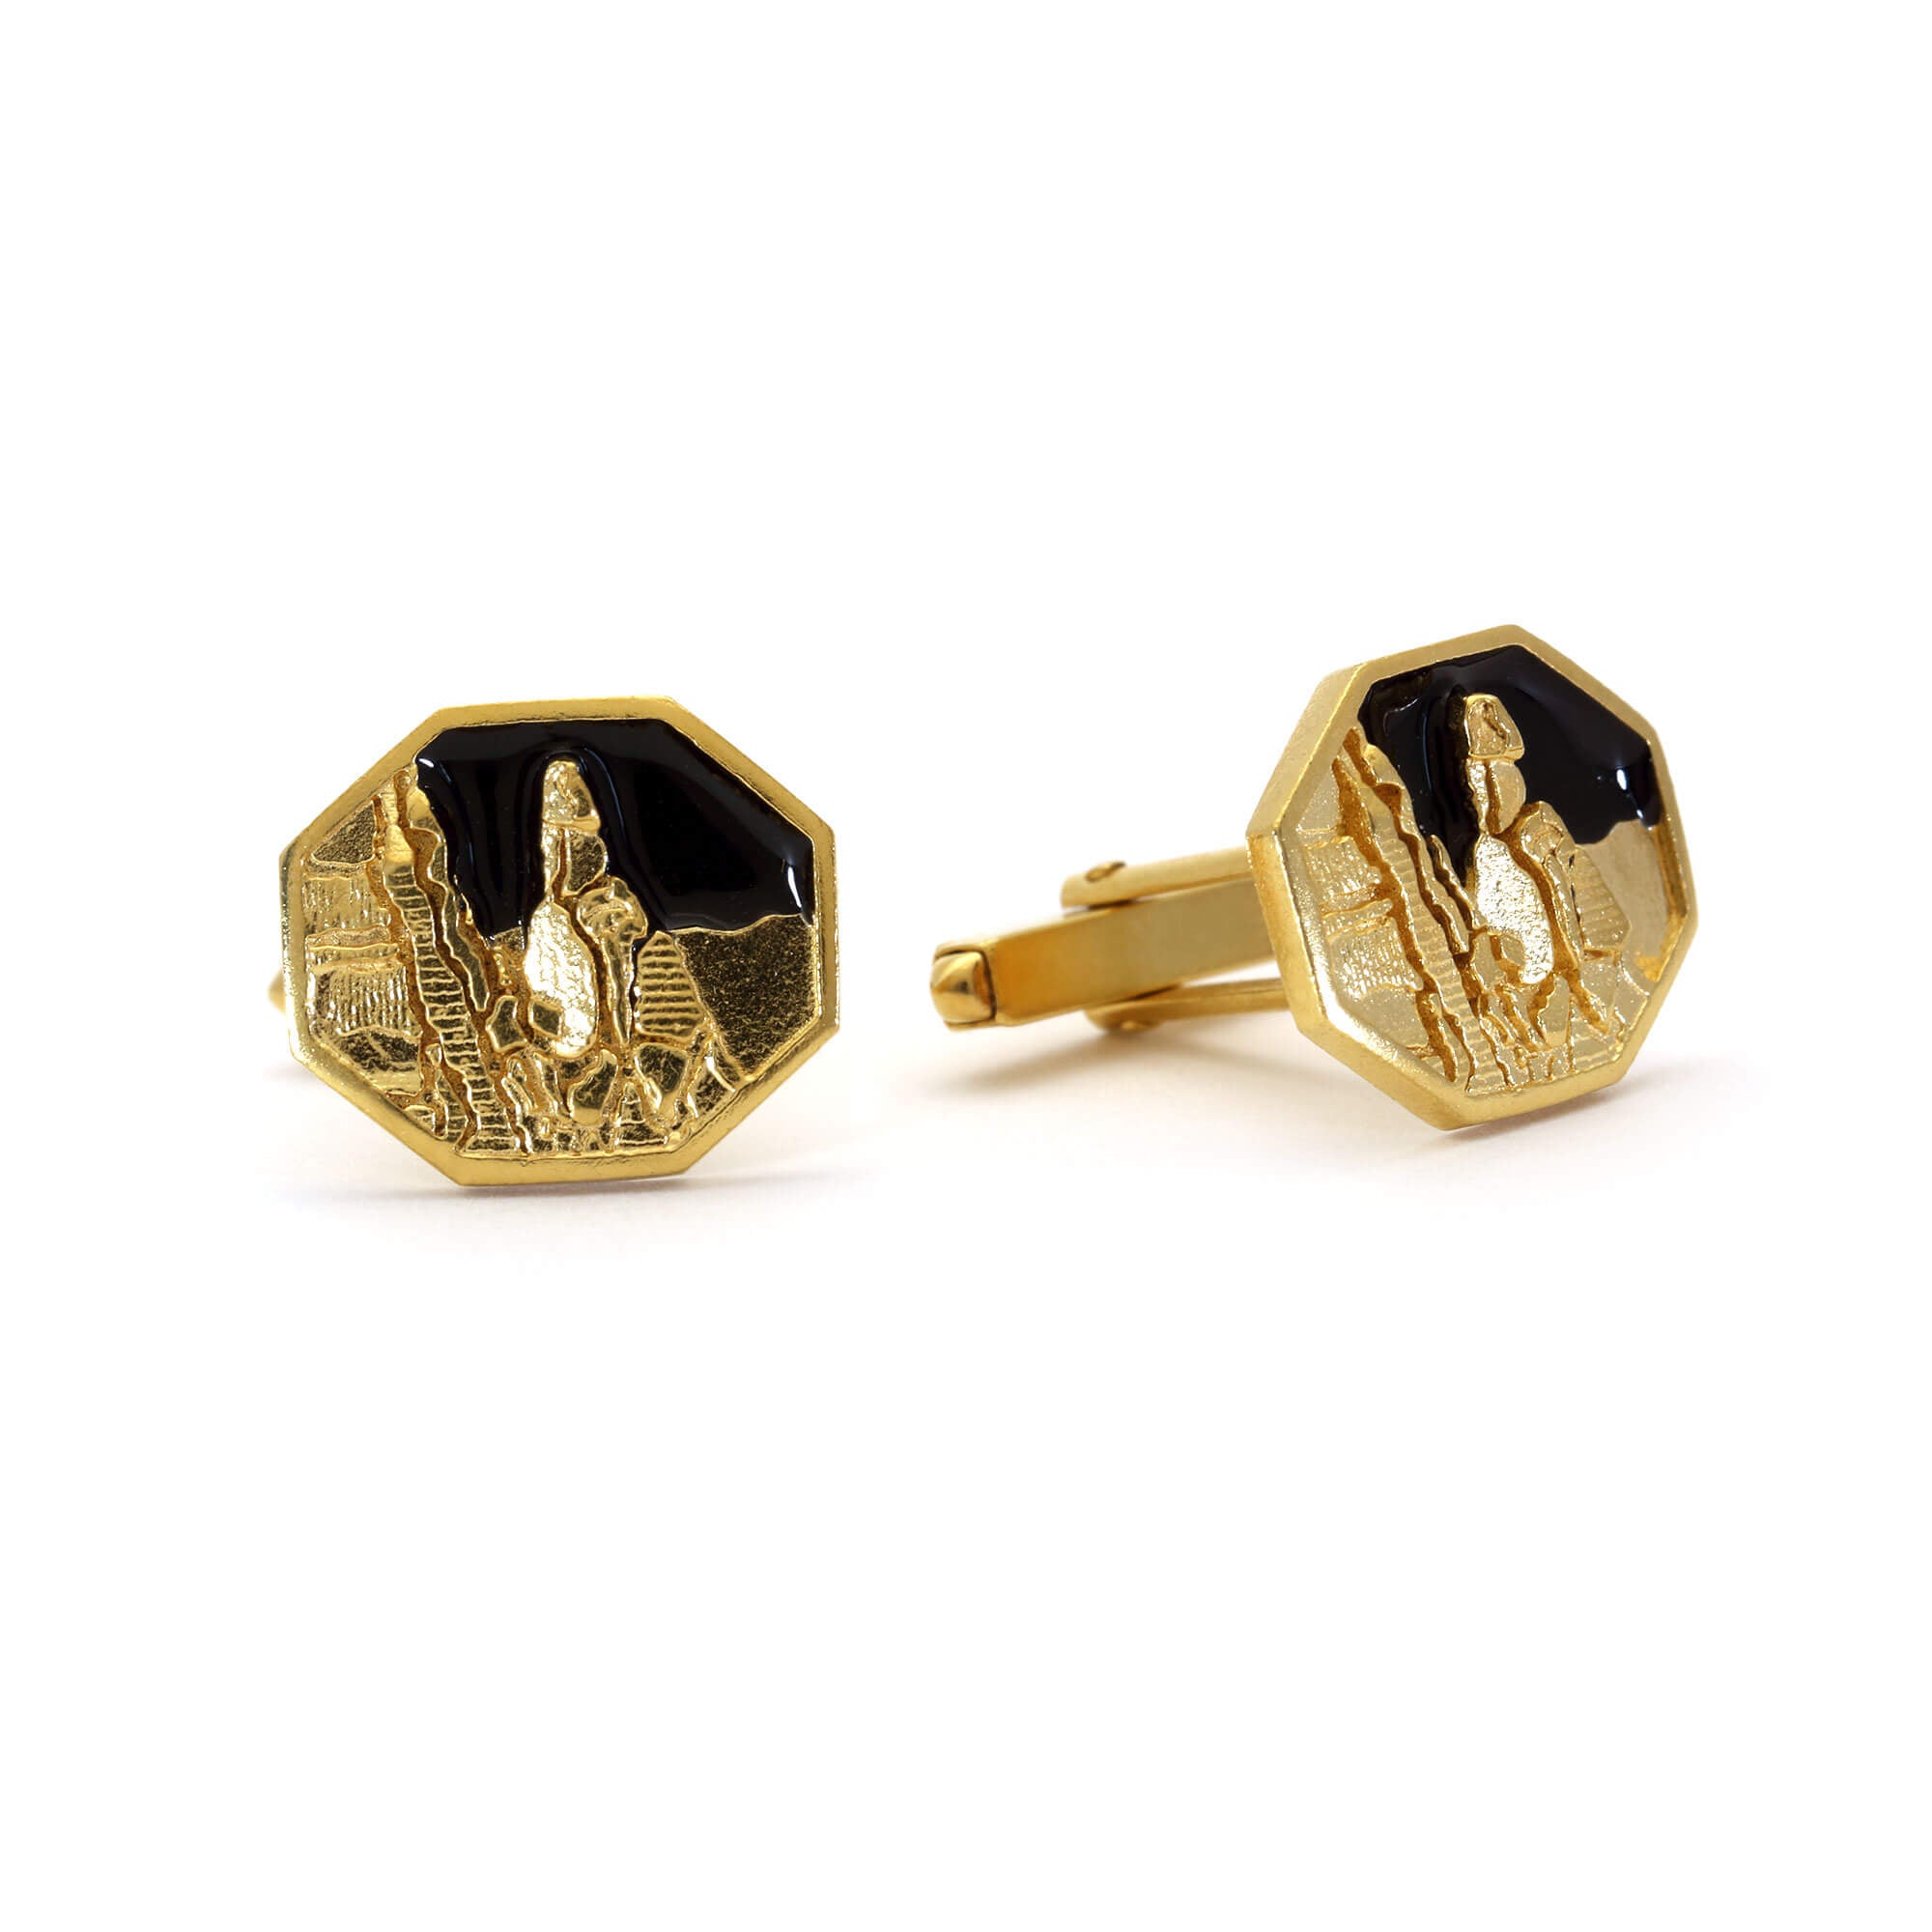 A pair of cufflinks picturing Napes Needle in gold against a black enamel sky